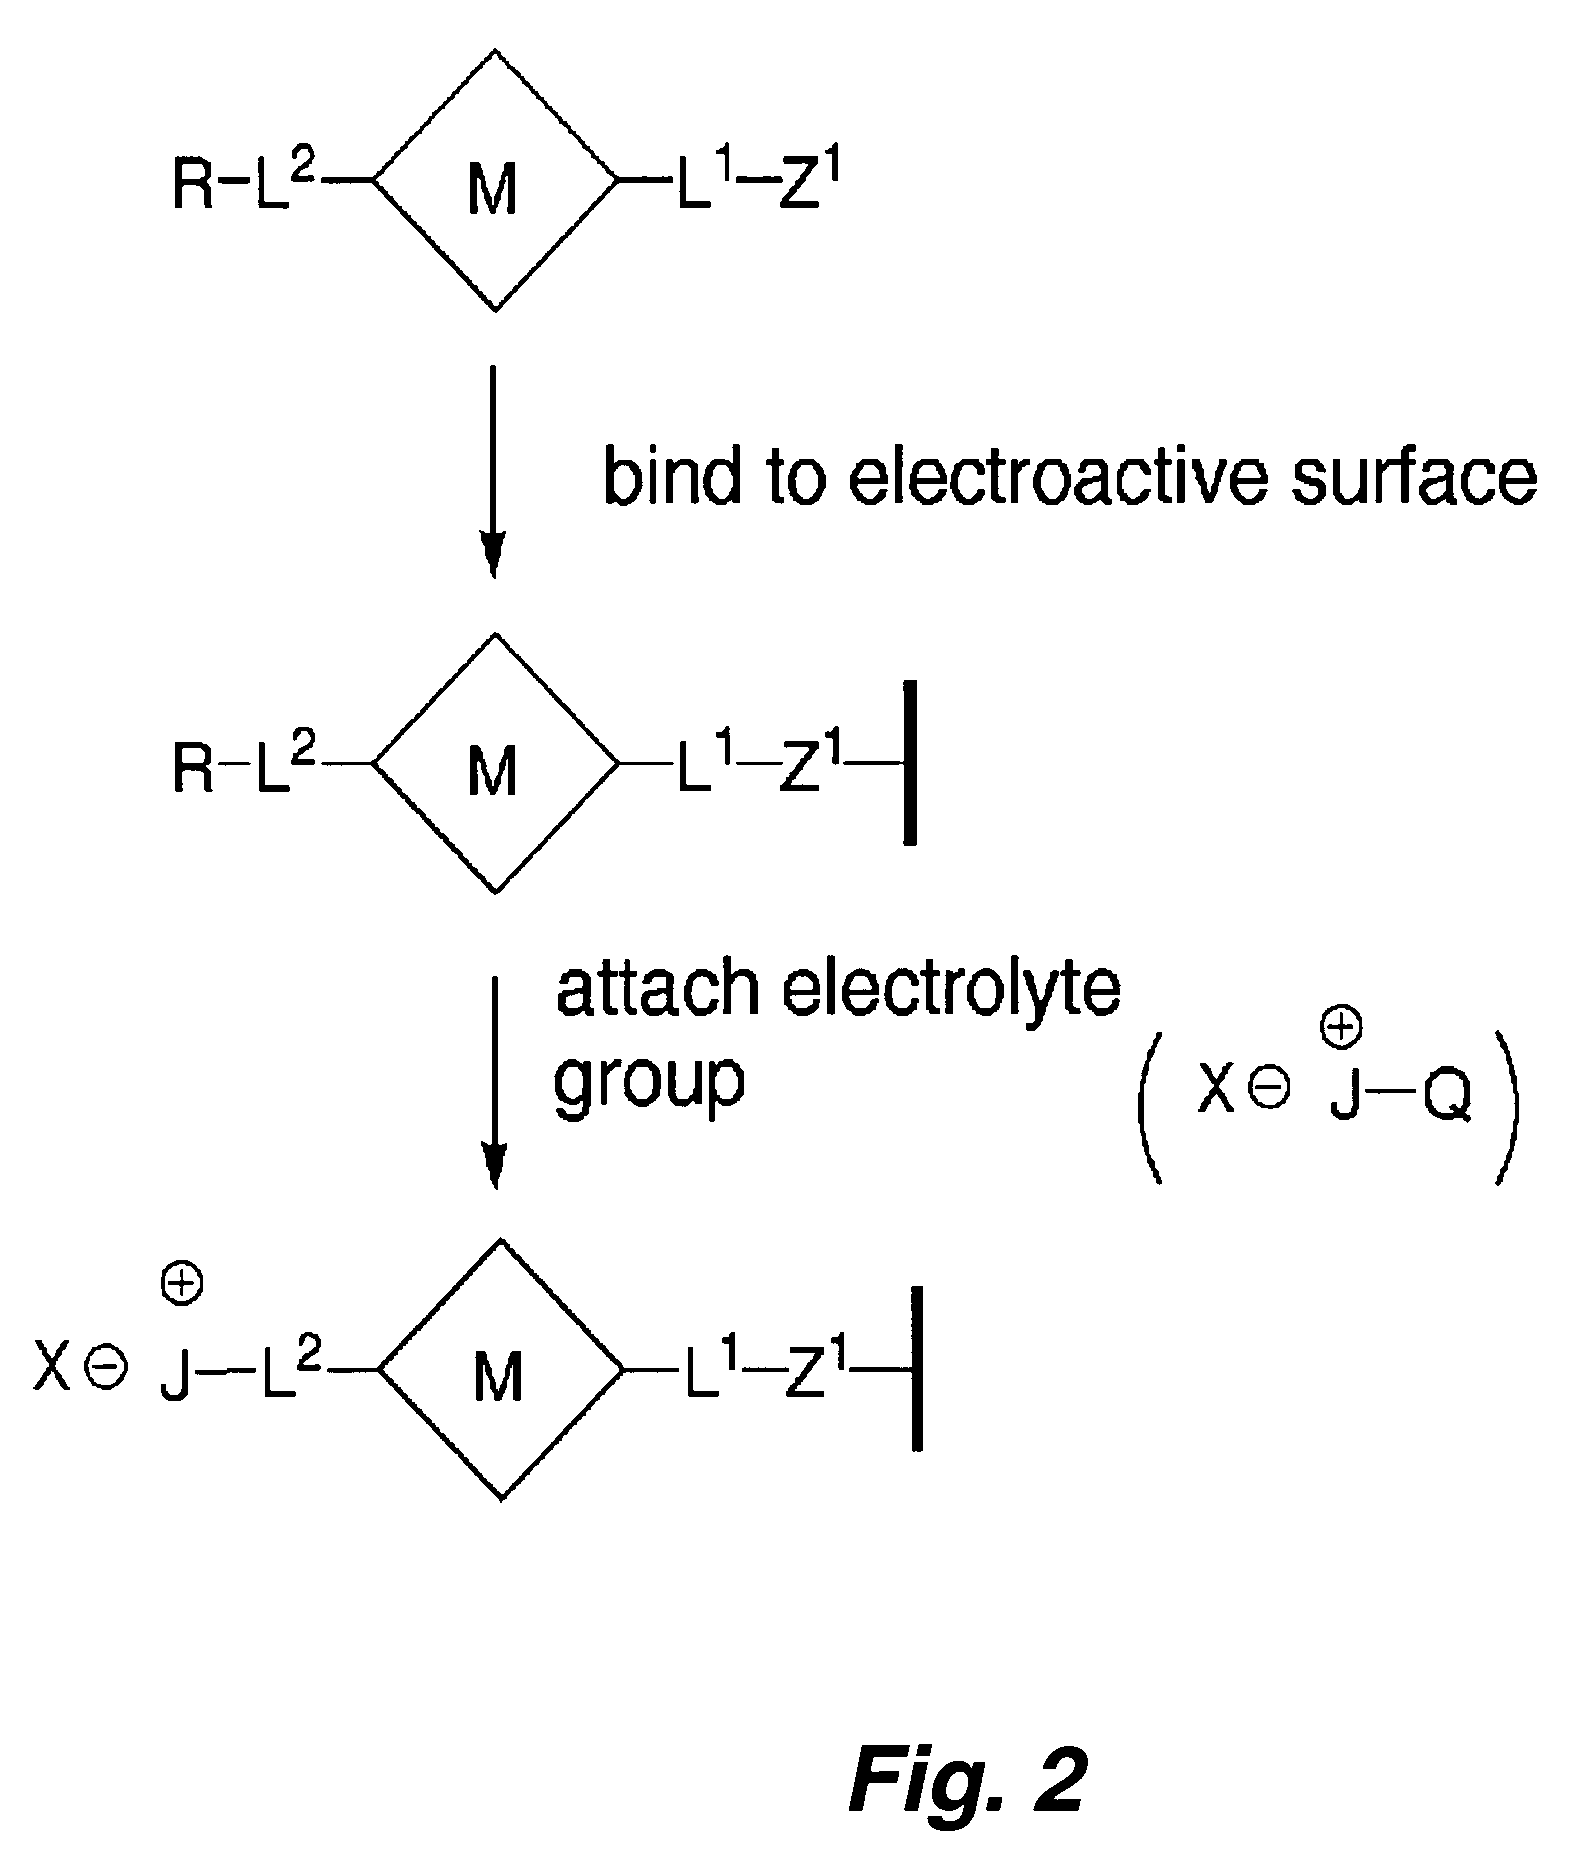 In situ patterning of electrolyte for molecular information storage devices